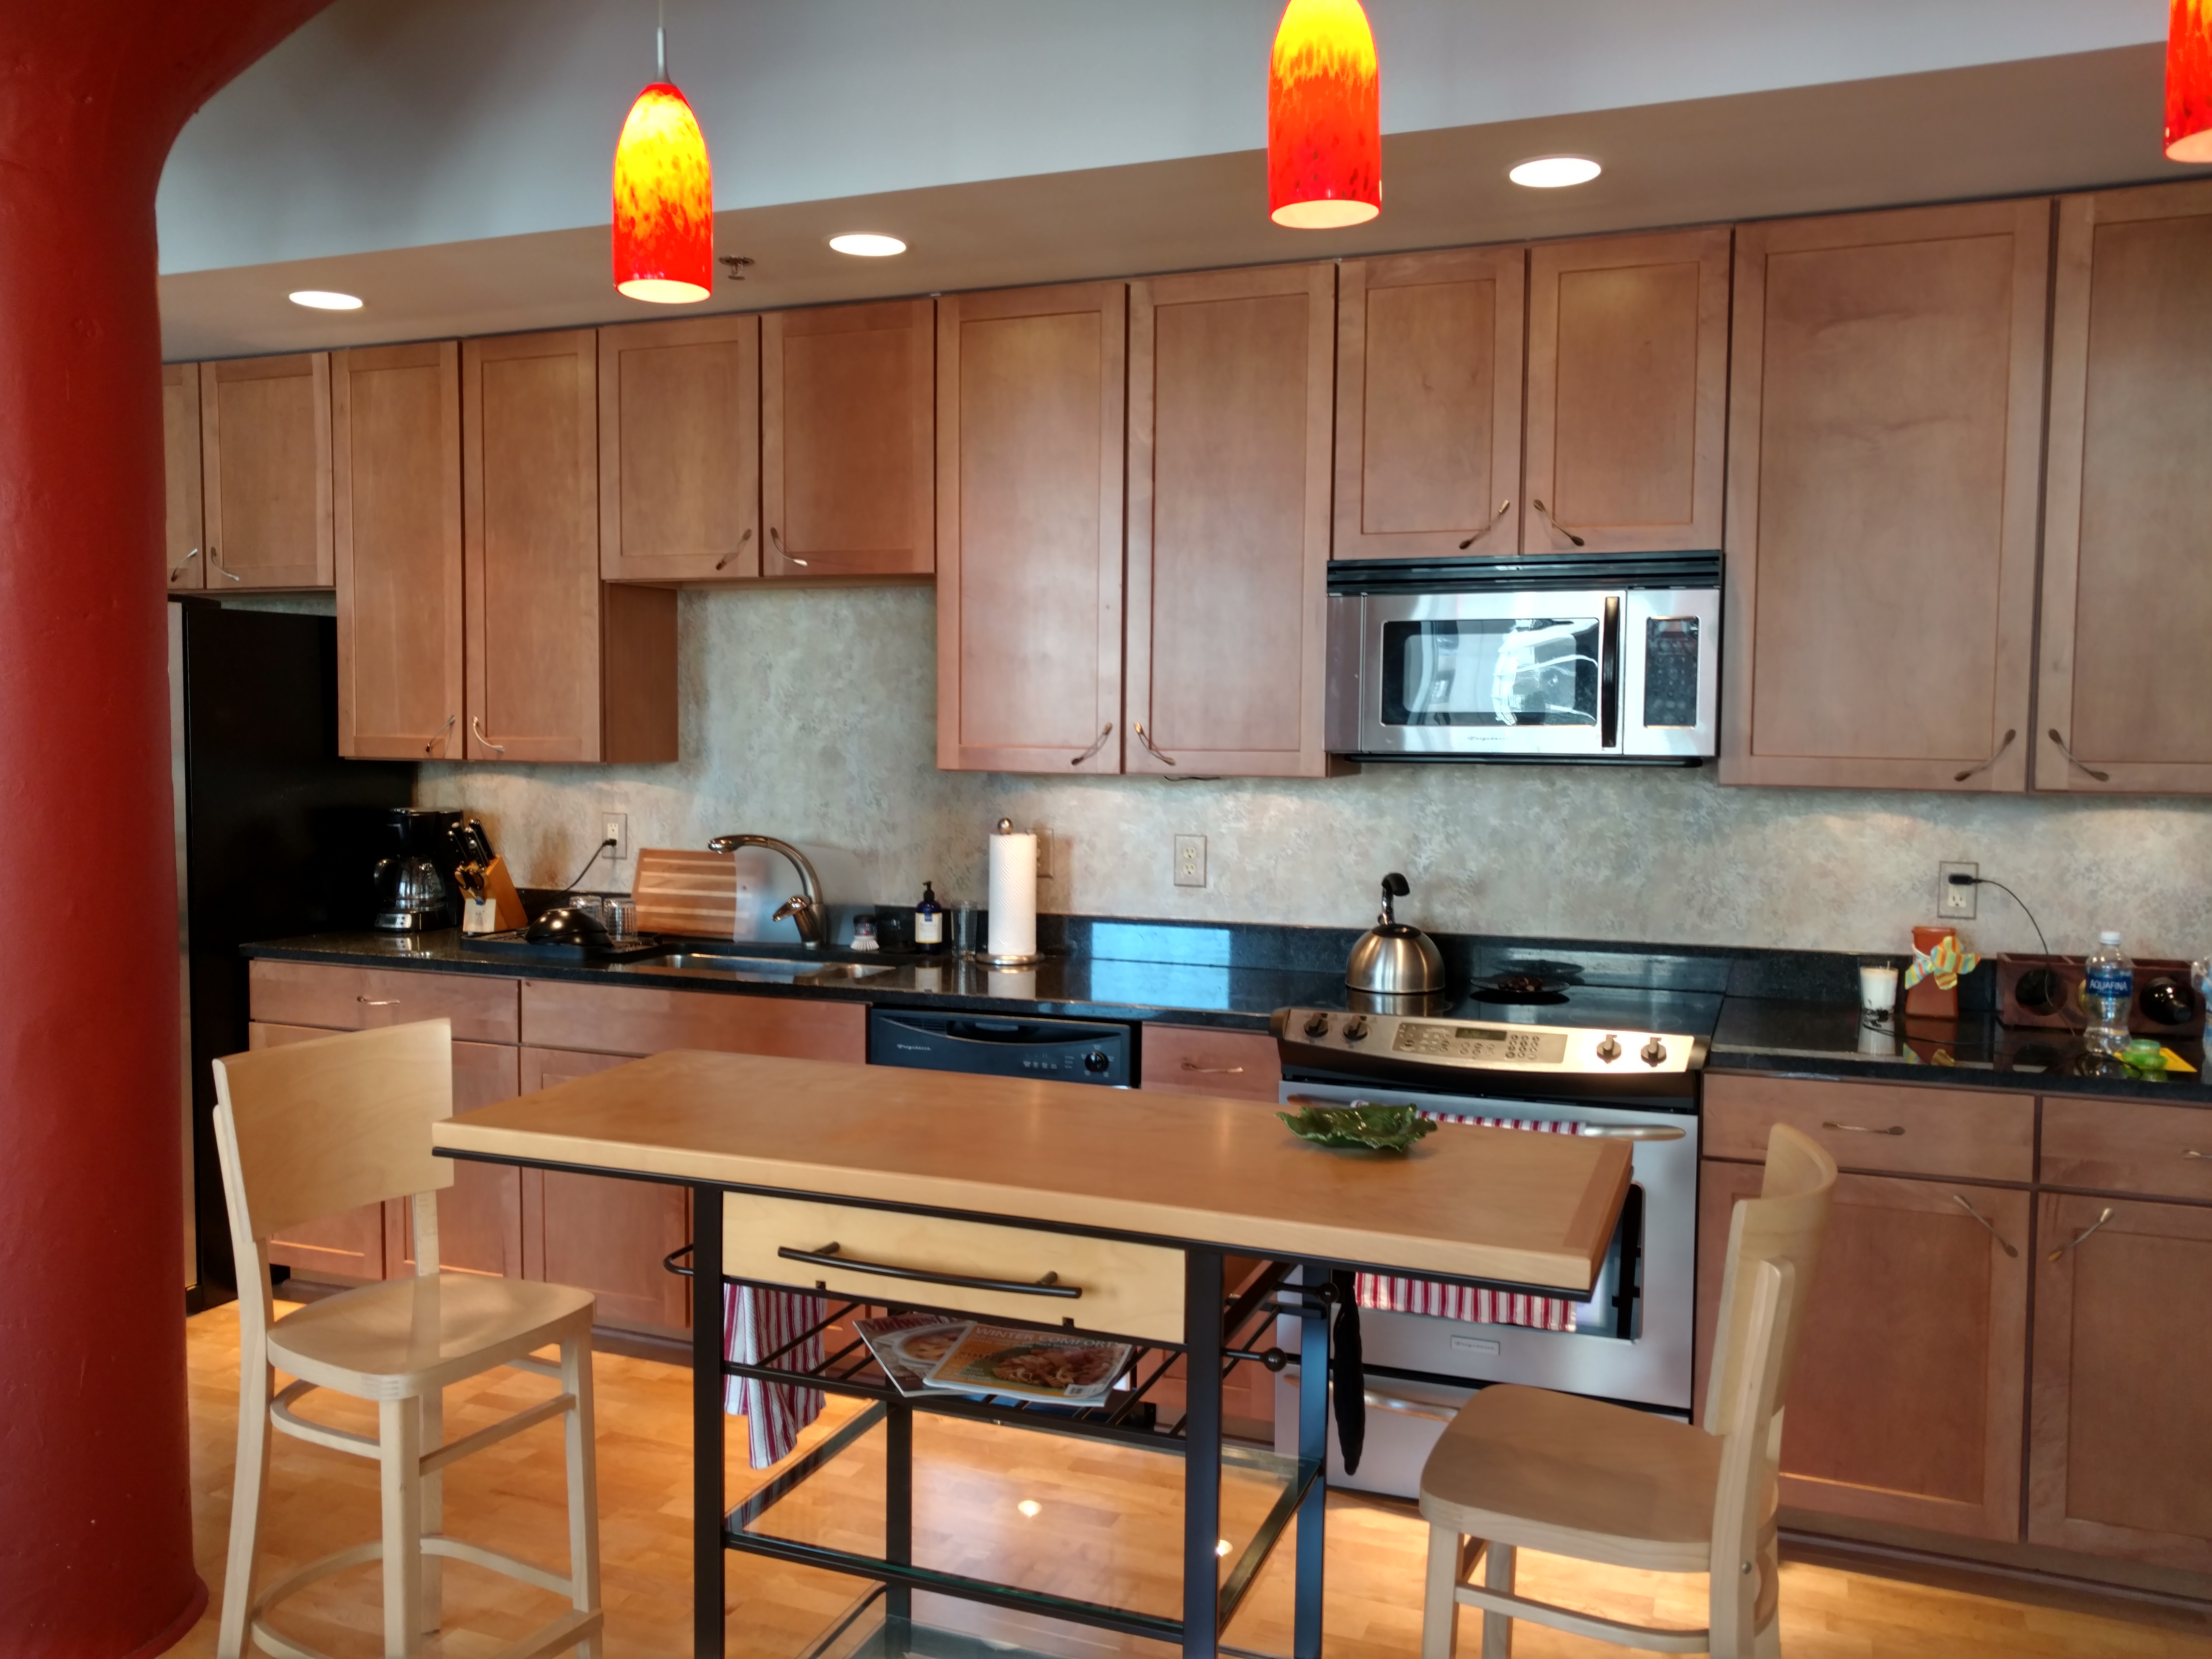 Picture of the kitchen area in Unit 404 in the Arena District Loft condominiums